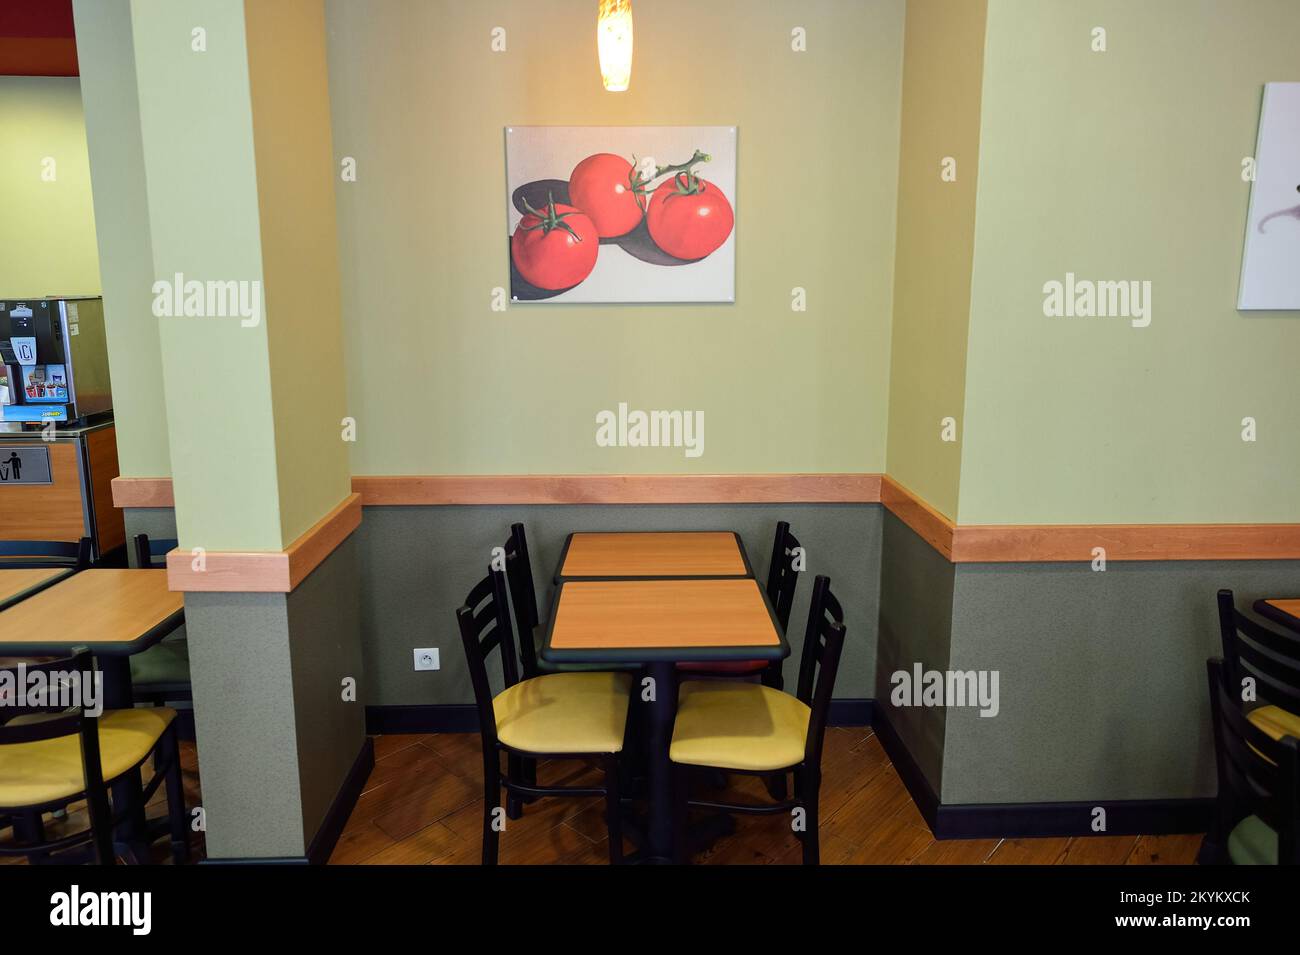 NICE, FRANCE - AUGUST 15, 2015: Subway fast food restaurant interior. Subway is an American fast food restaurant franchise that primarily sells submar Stock Photo